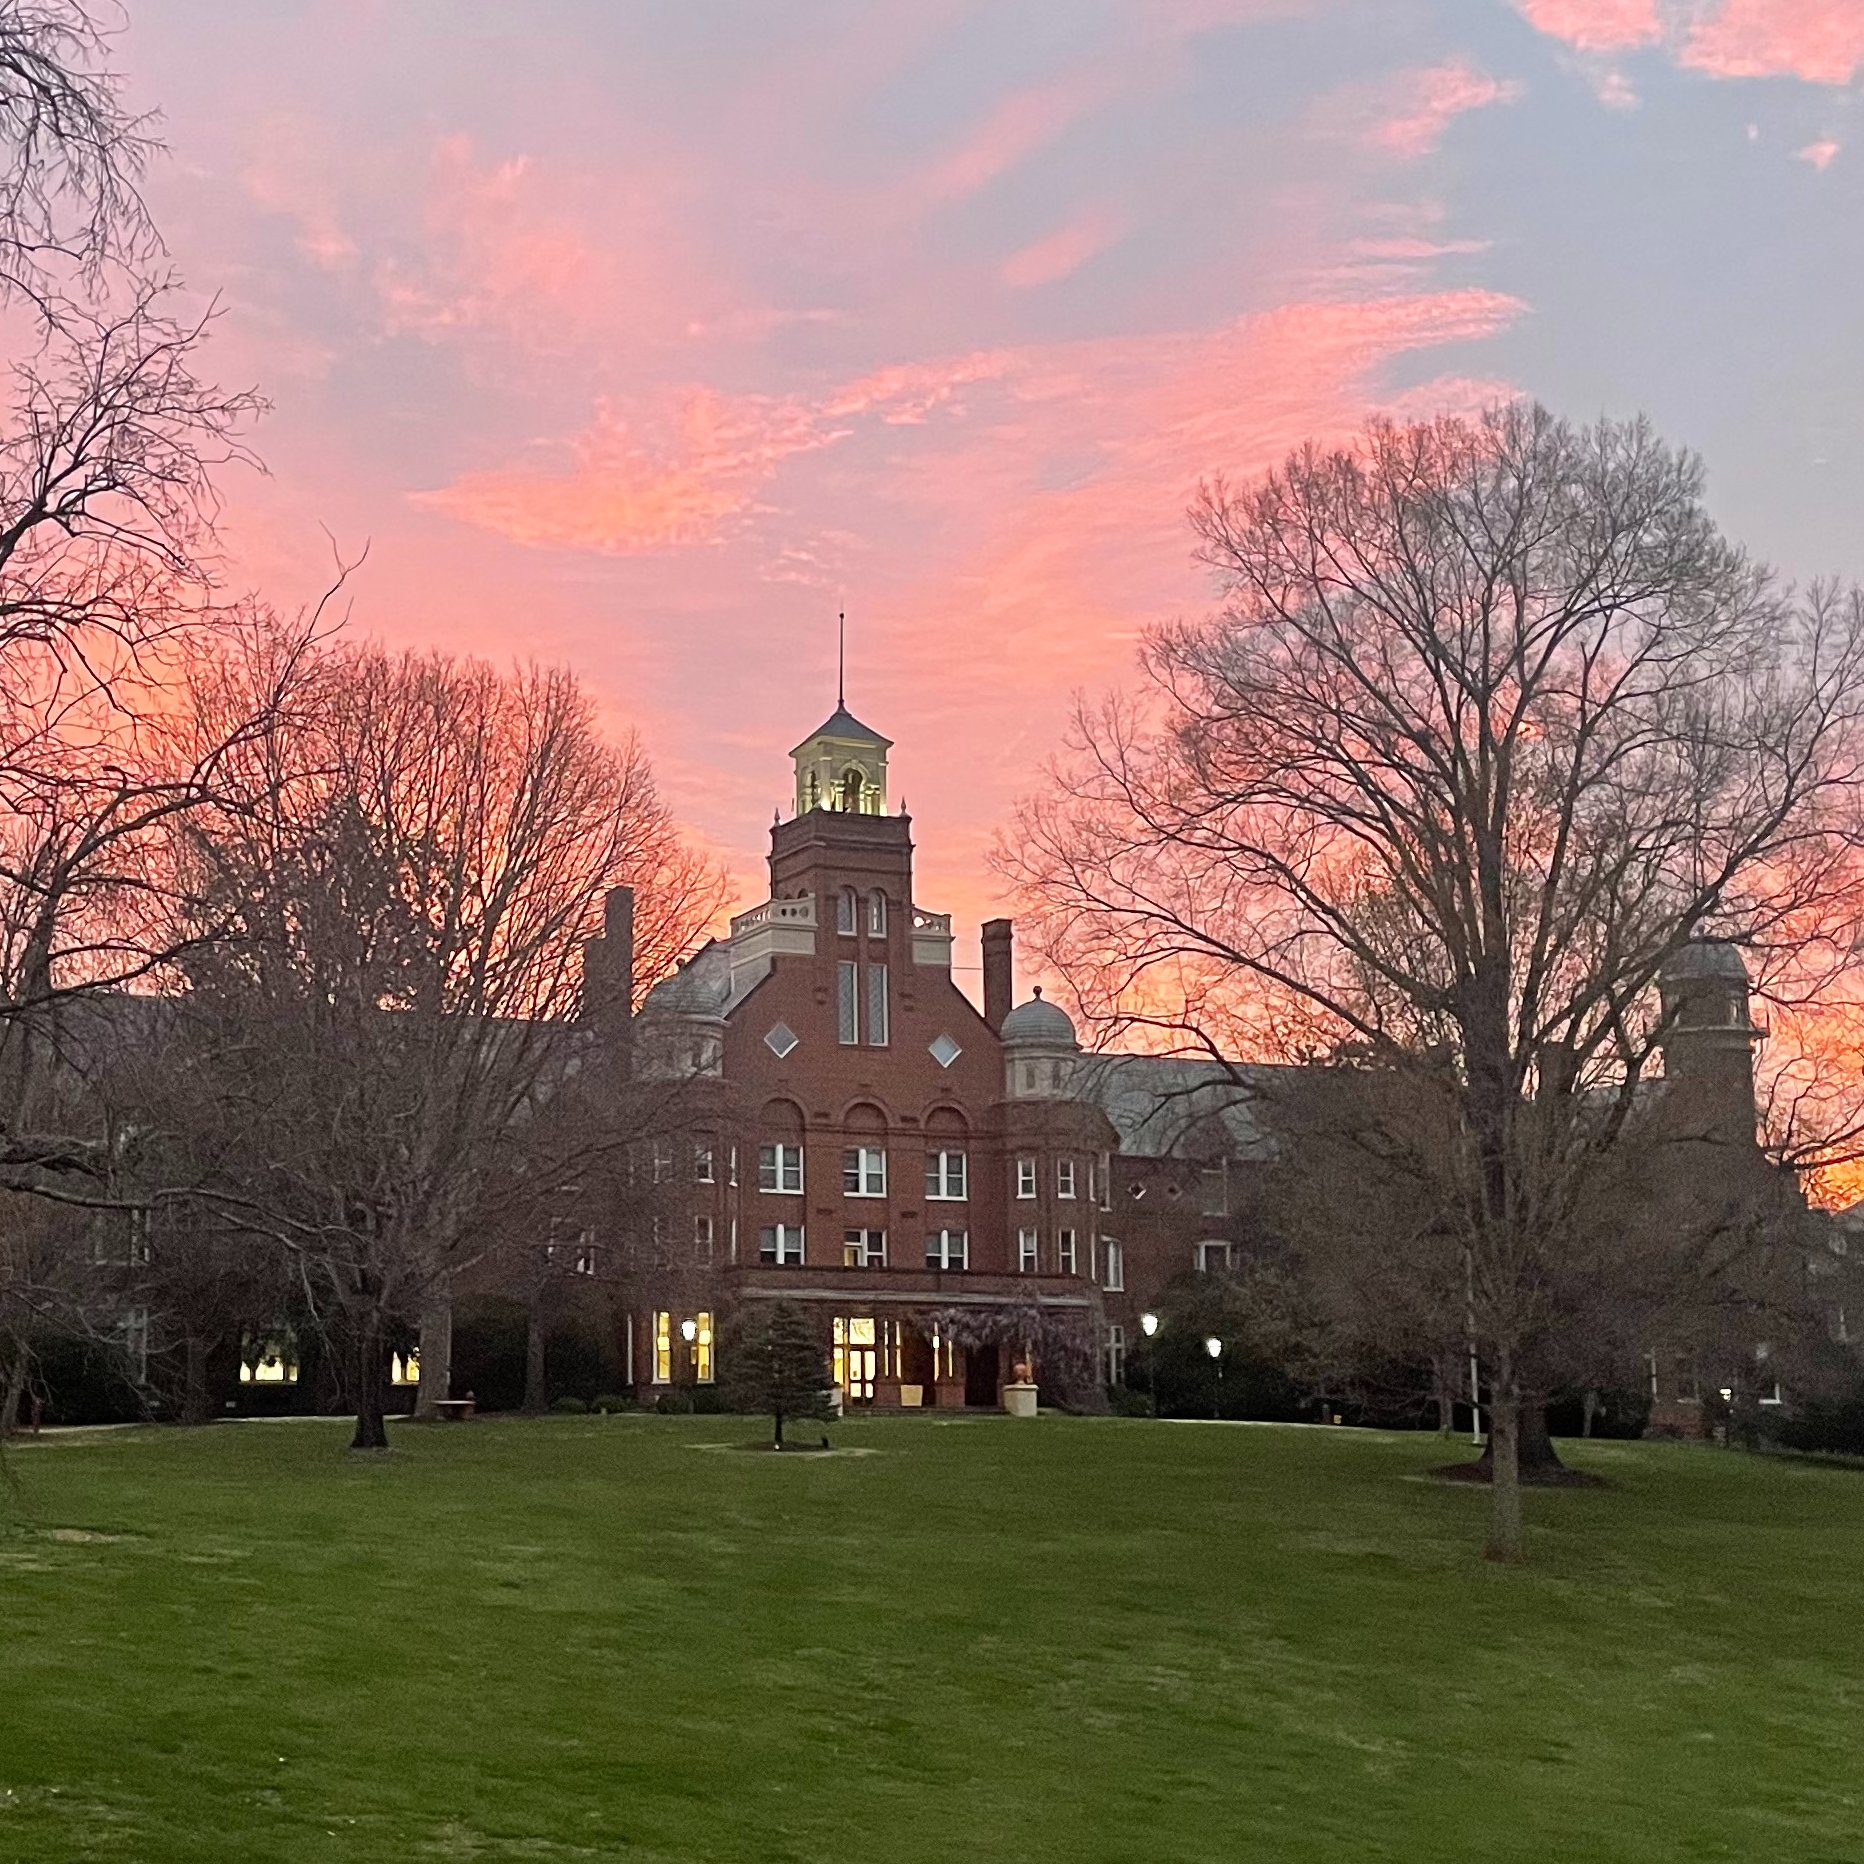 Sunrise of Randolph College's red-brick Main Hall. The sky is light pink and blue.